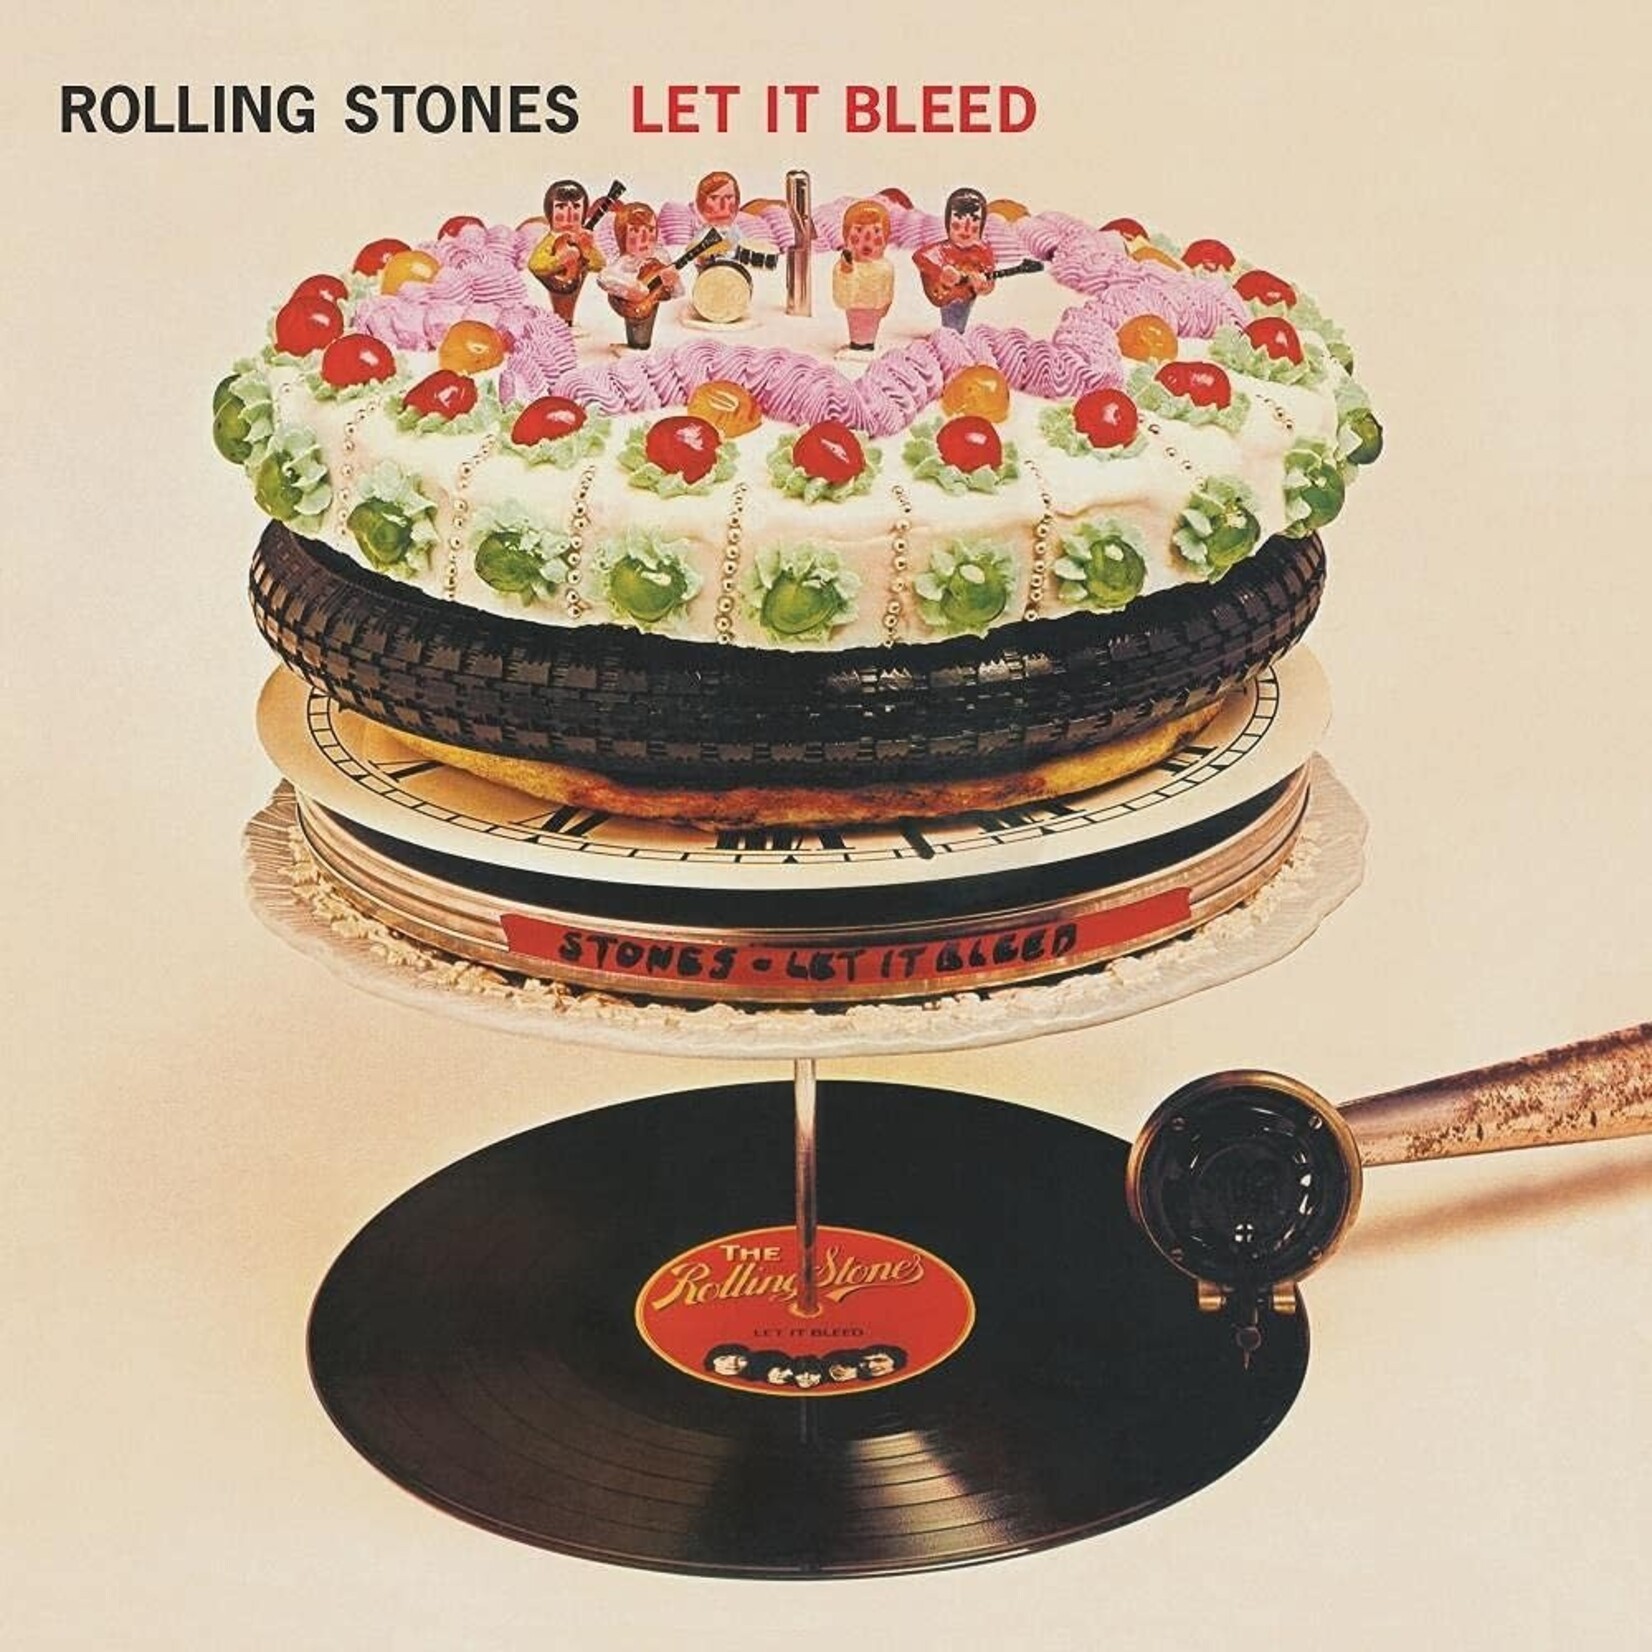 The Rolling Stones - Let It Bleed (50th Anniversary Edition) CD